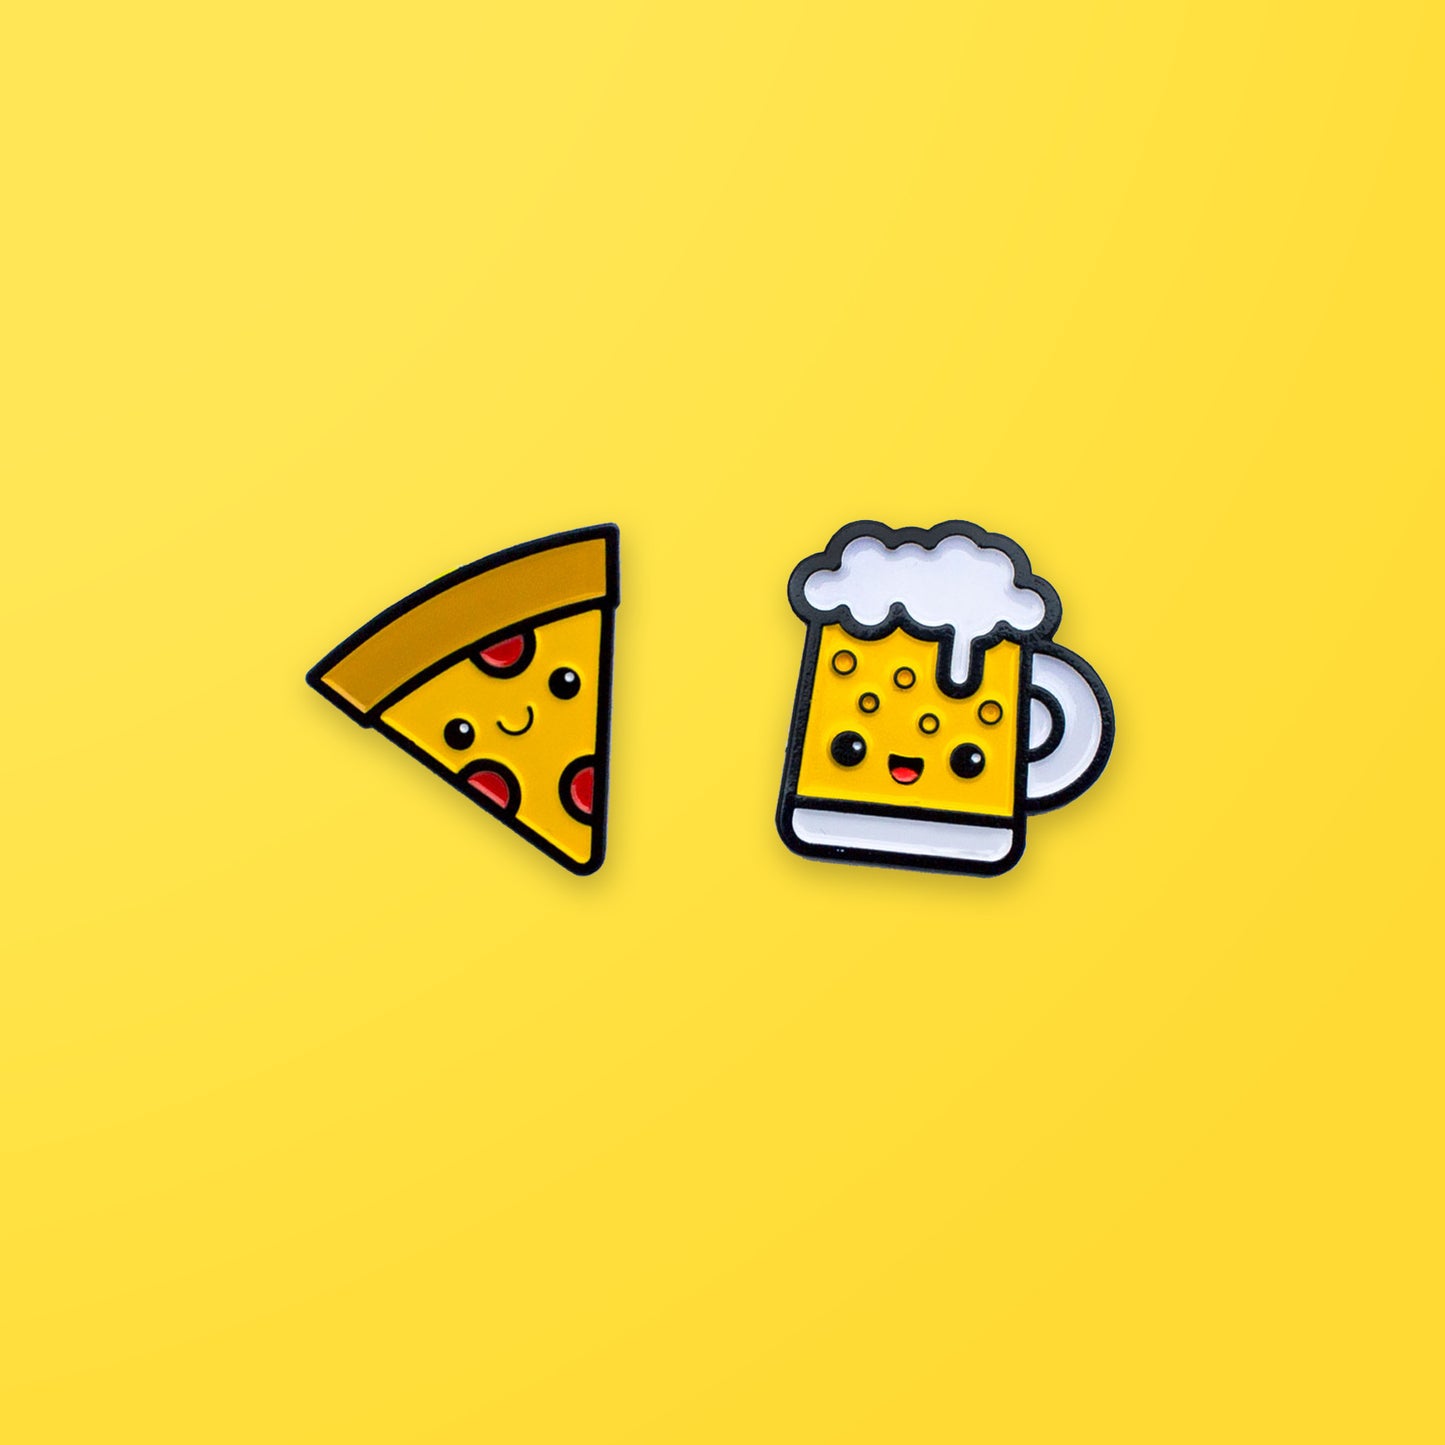 Pizza and Beer enamel pin set on yellow background